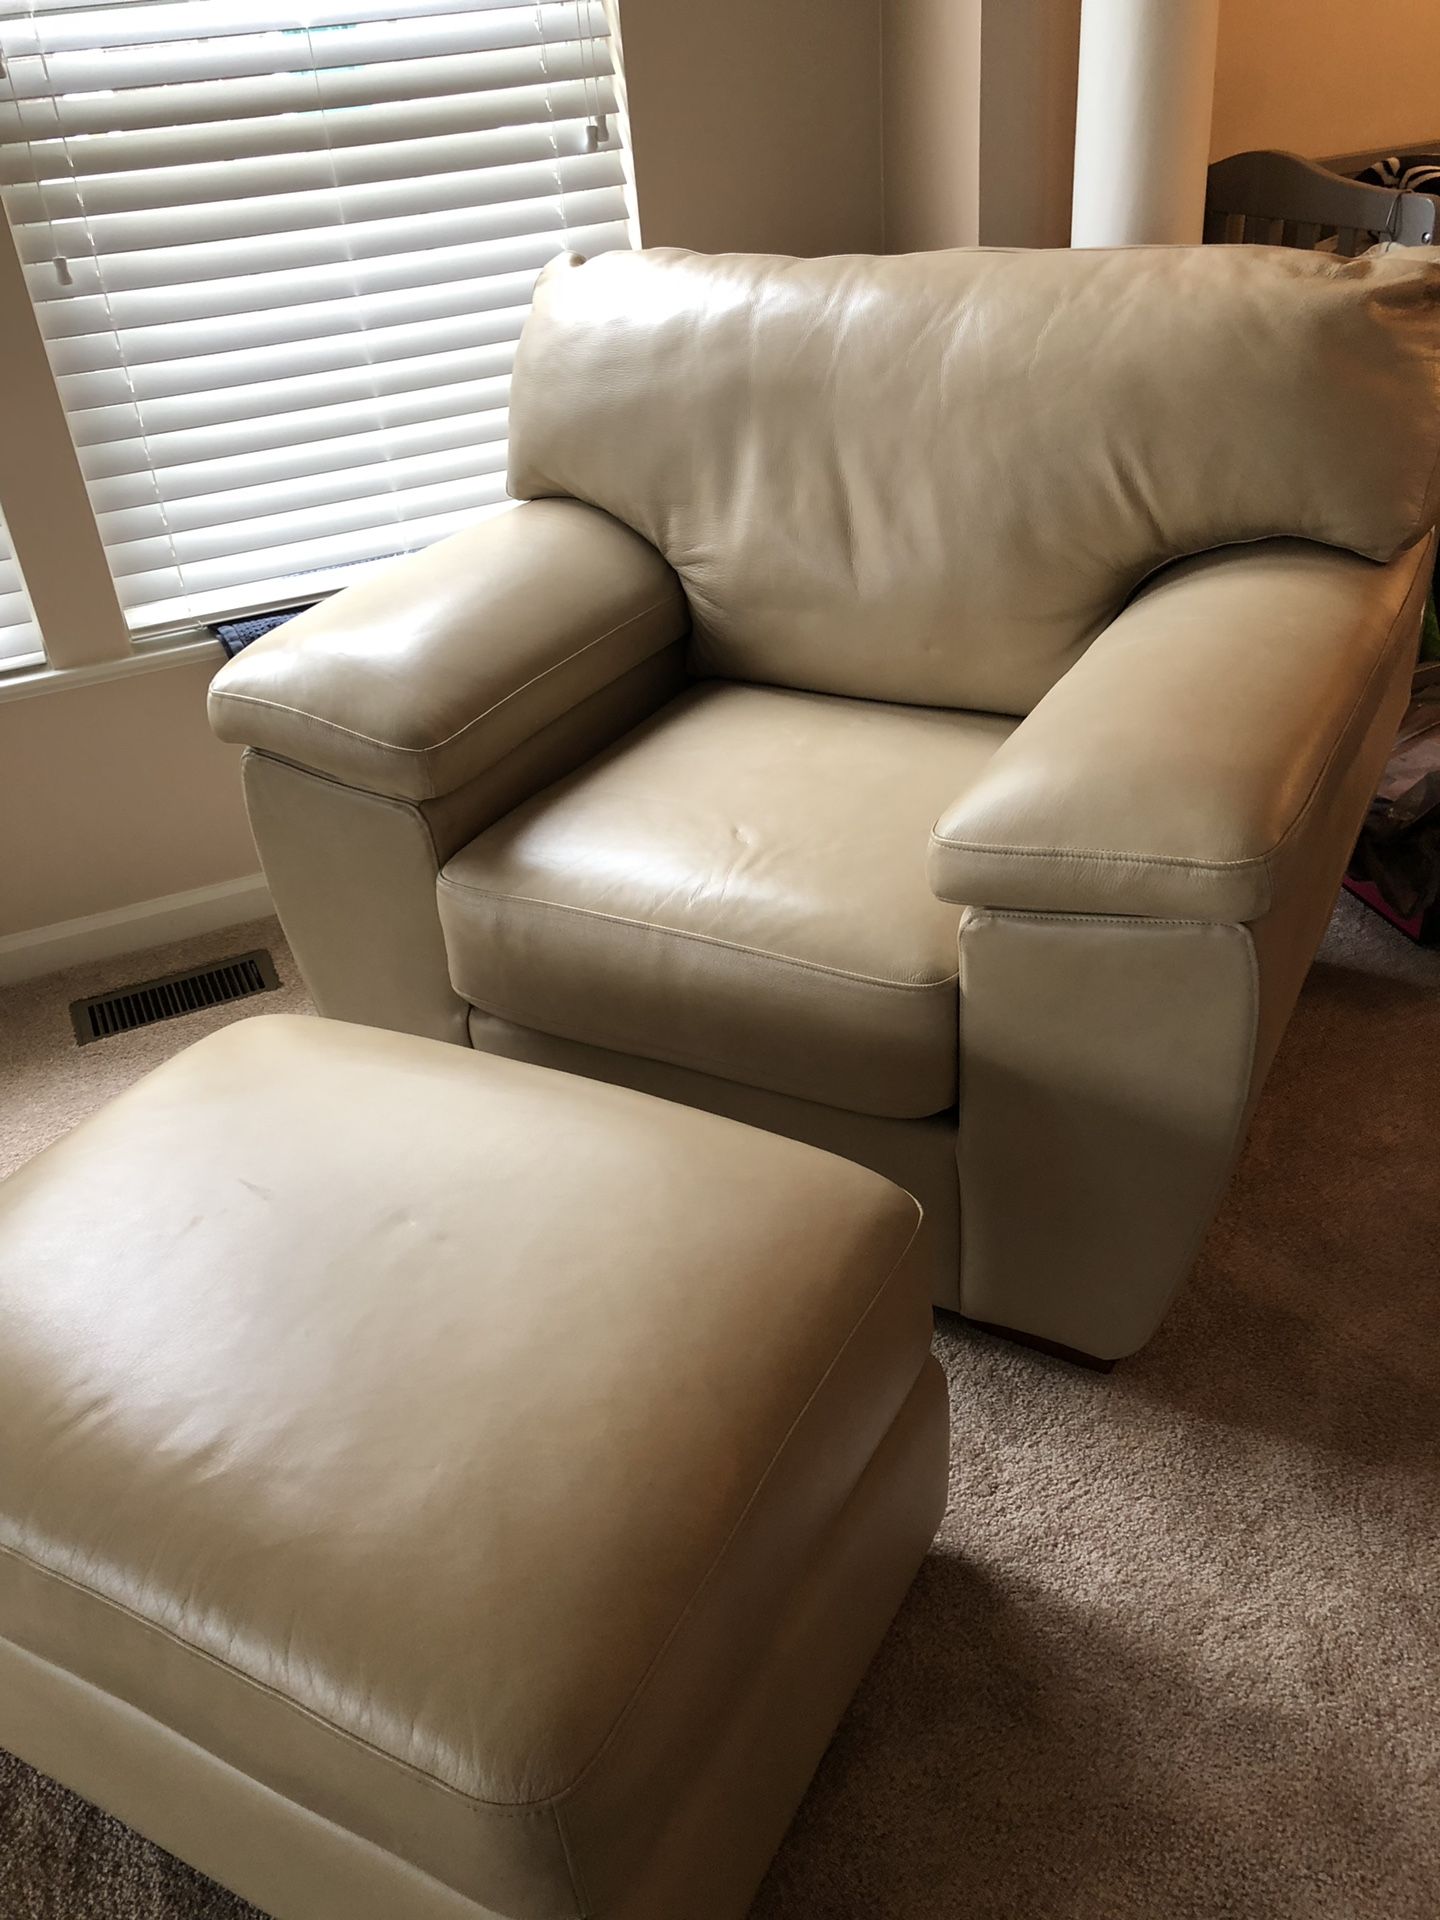 Laz-e-boy leather sofa and over sized chair and ottoman. Great condition. Ready for pick up November 6